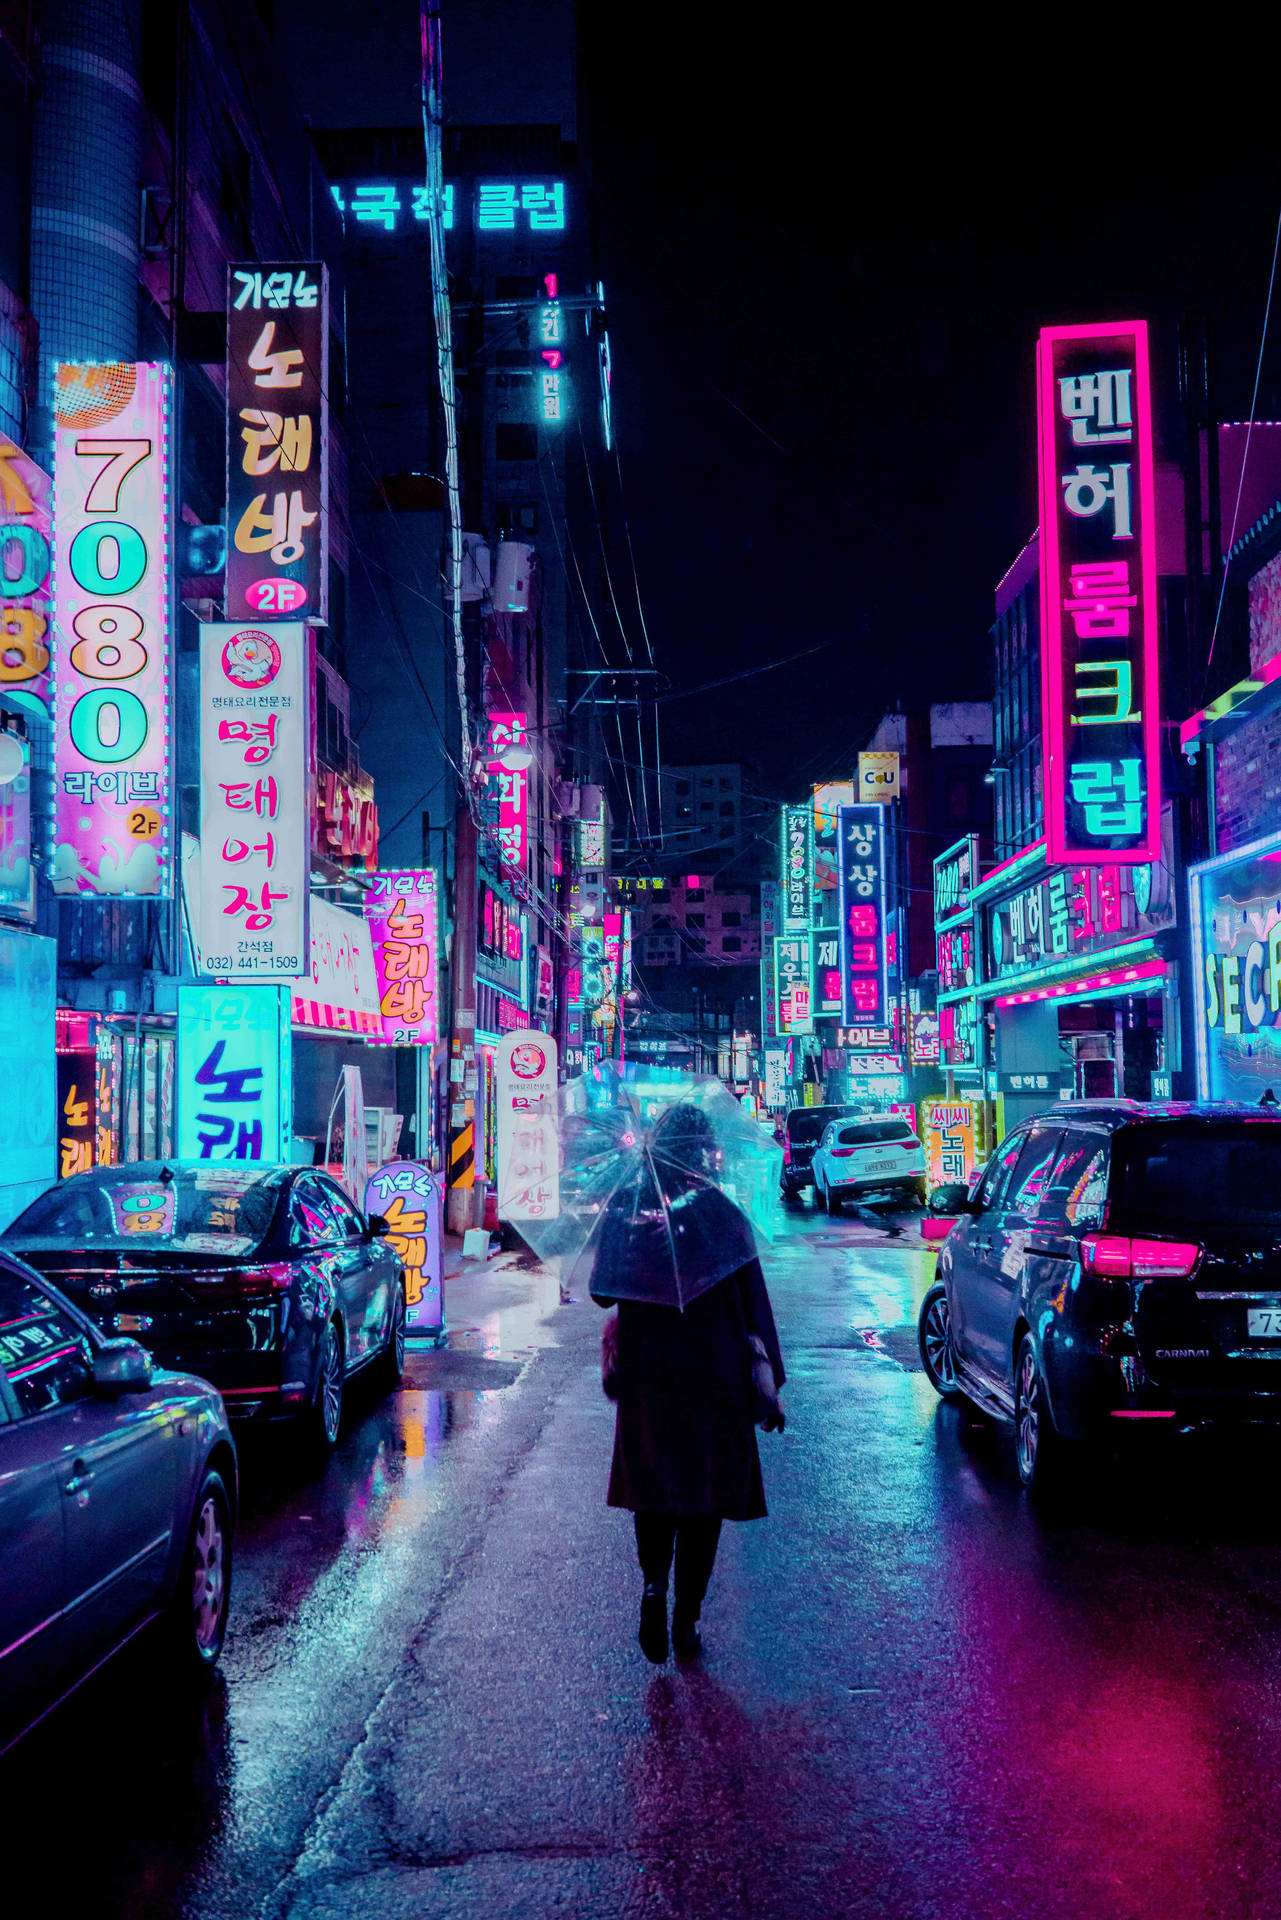 Free Neon City Wallpaper Downloads, [200+] Neon City Wallpapers for FREE |  